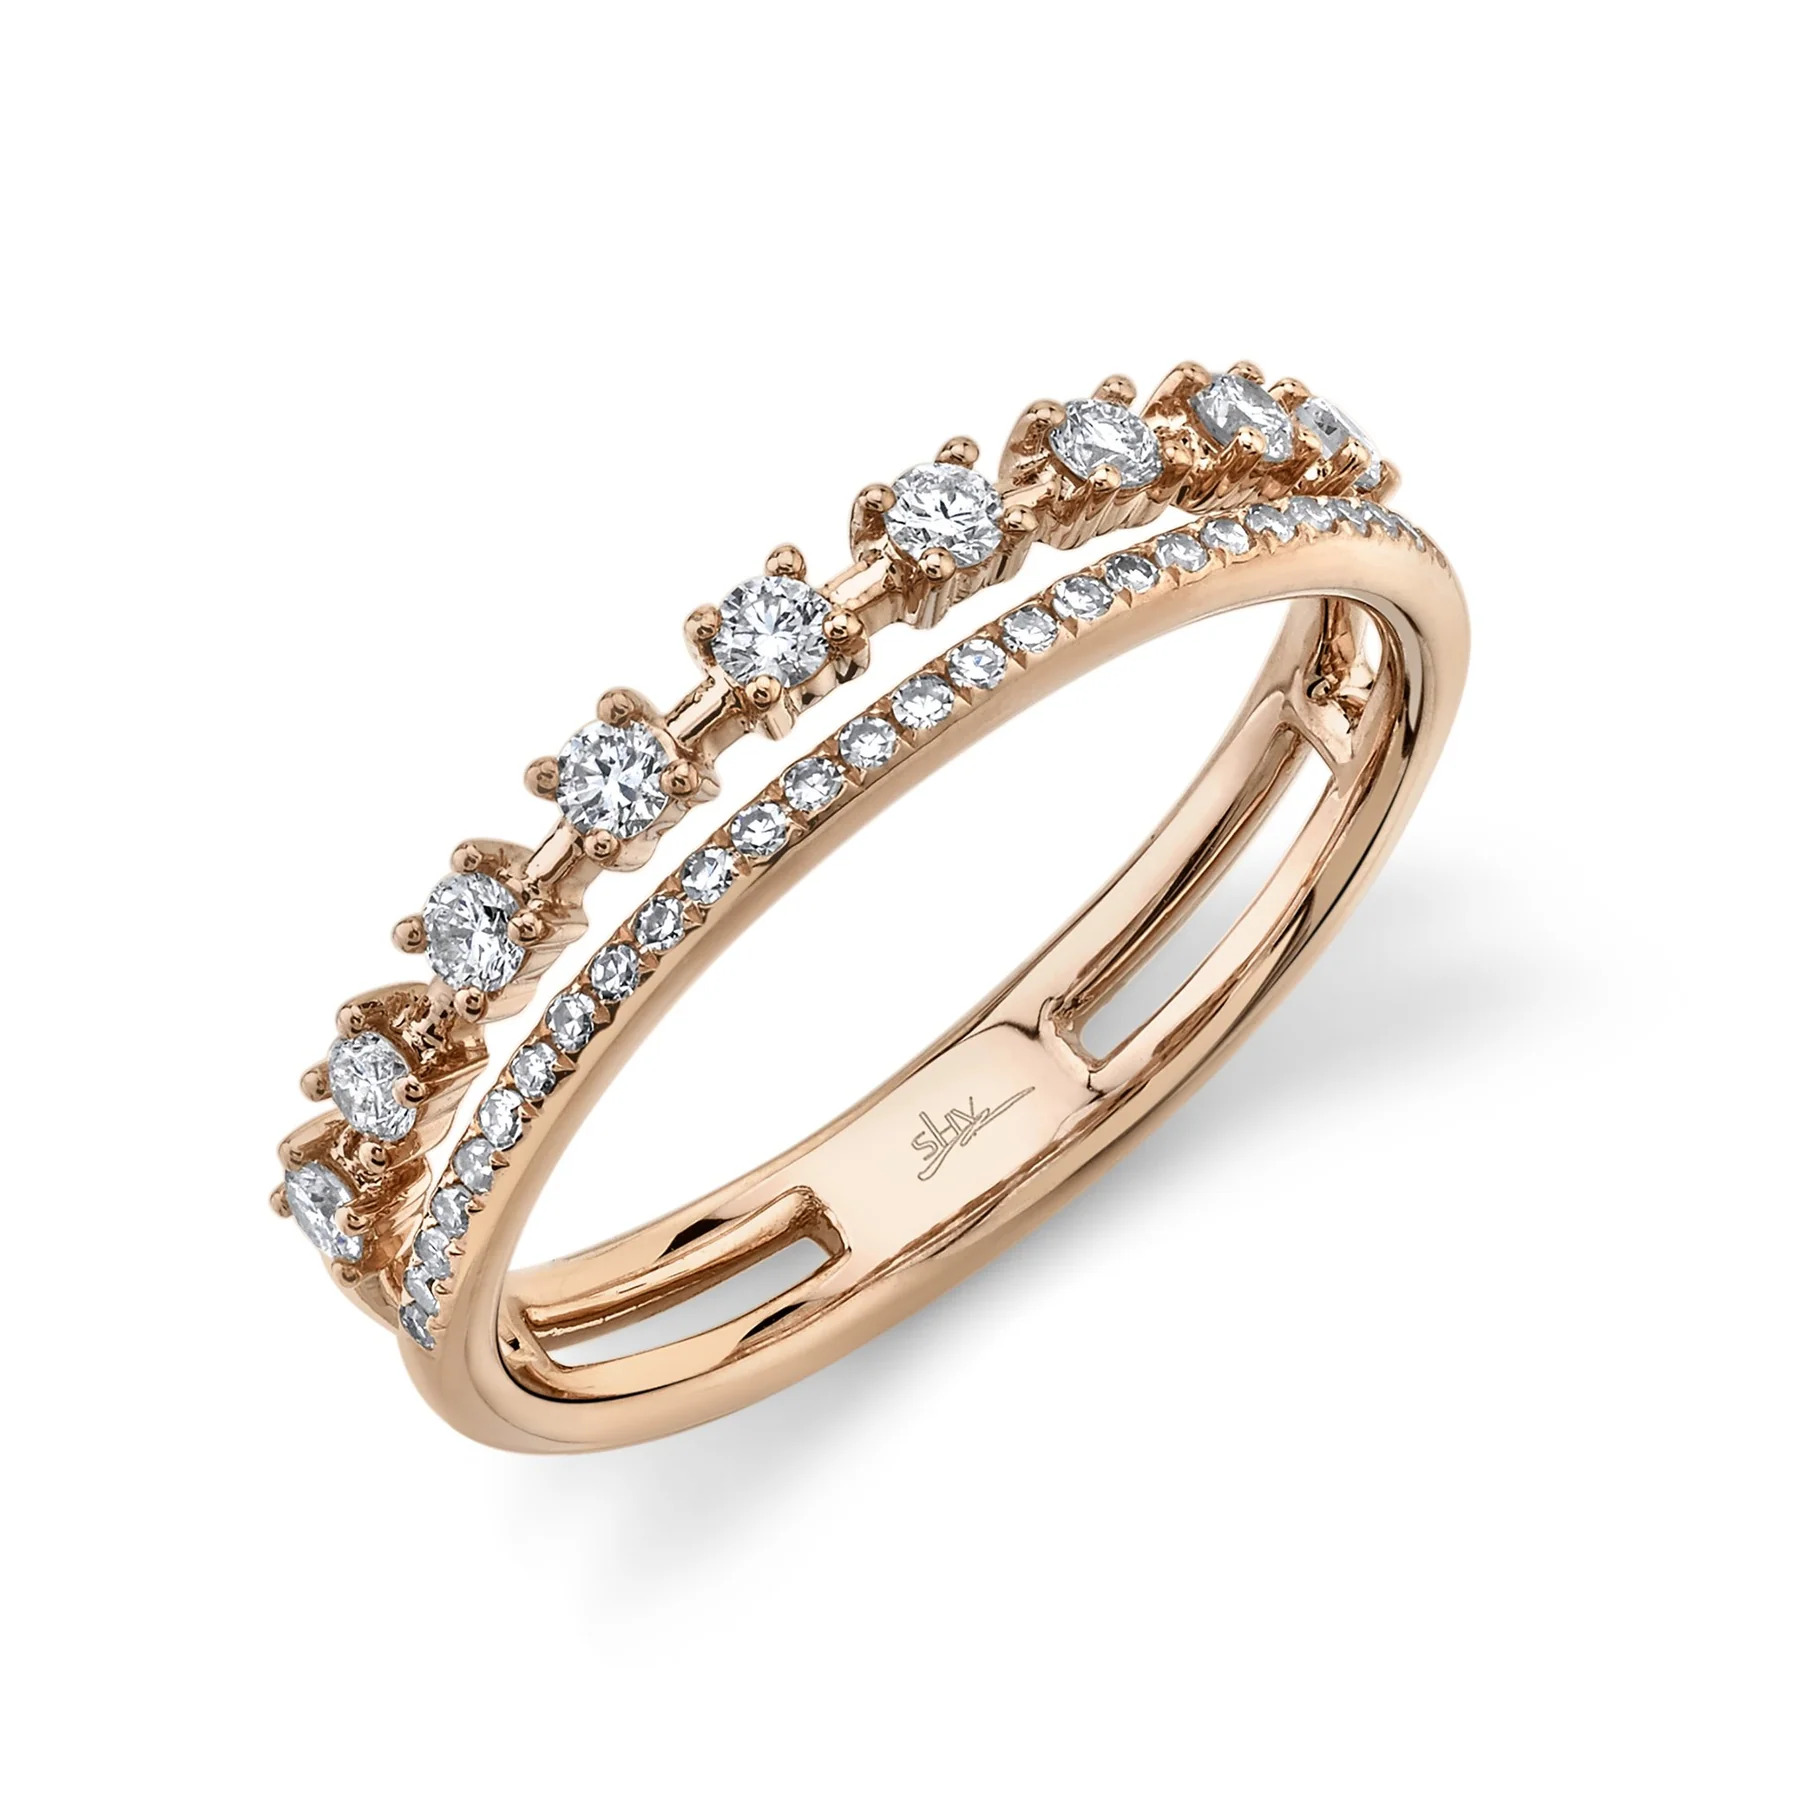 One rose gold ring is positioned slanted toward the camera. The ring showcases a double-row design, giving the illusion of two diamond bands. The first row features diamonds set in prongs, spaced out along the band. The second row of the ring is encrusted with diamonds.